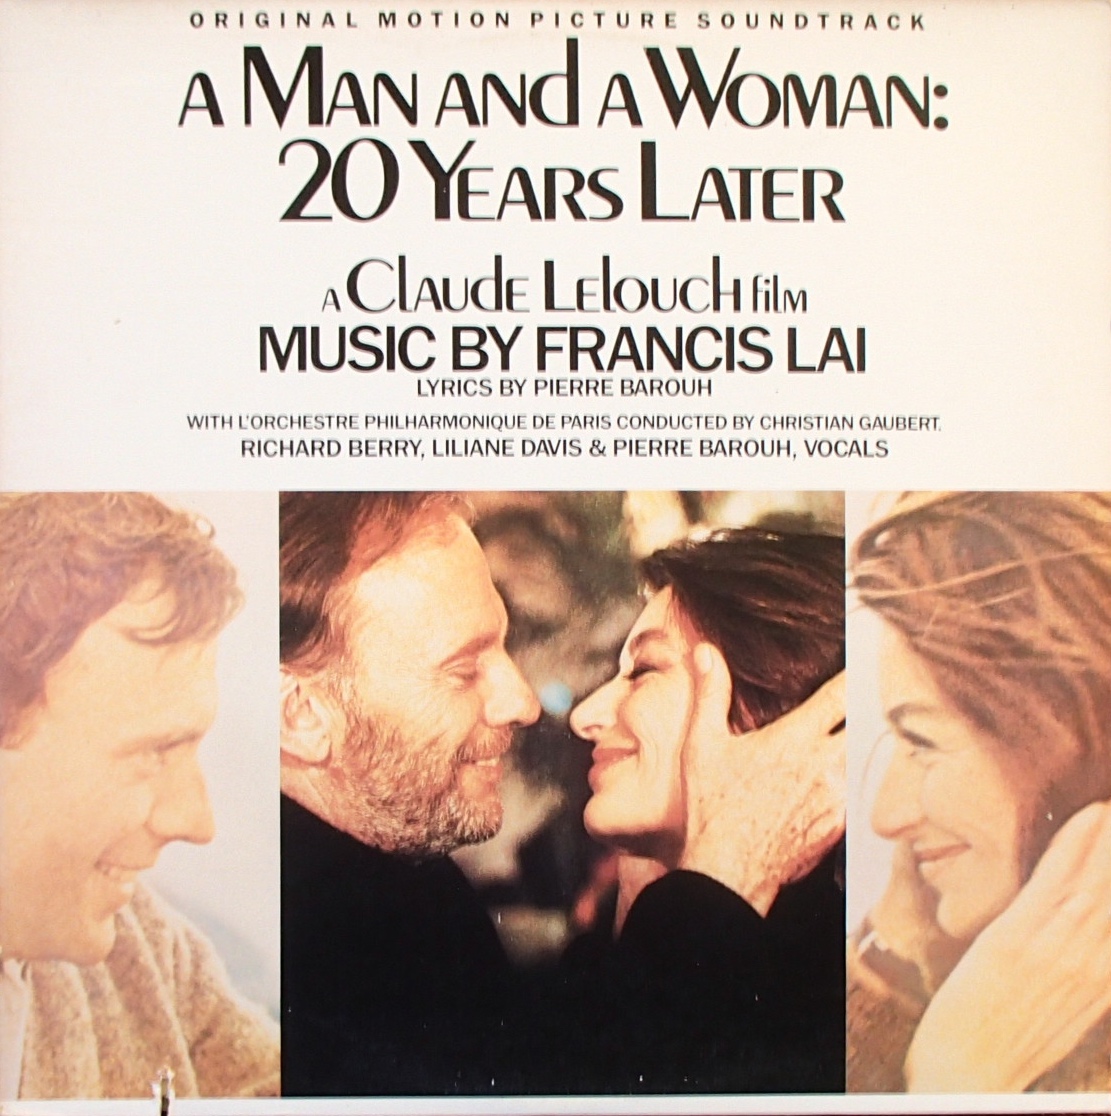 A Man And A Woman: 20 Years Later (Original Motion Picture Soundtrack)